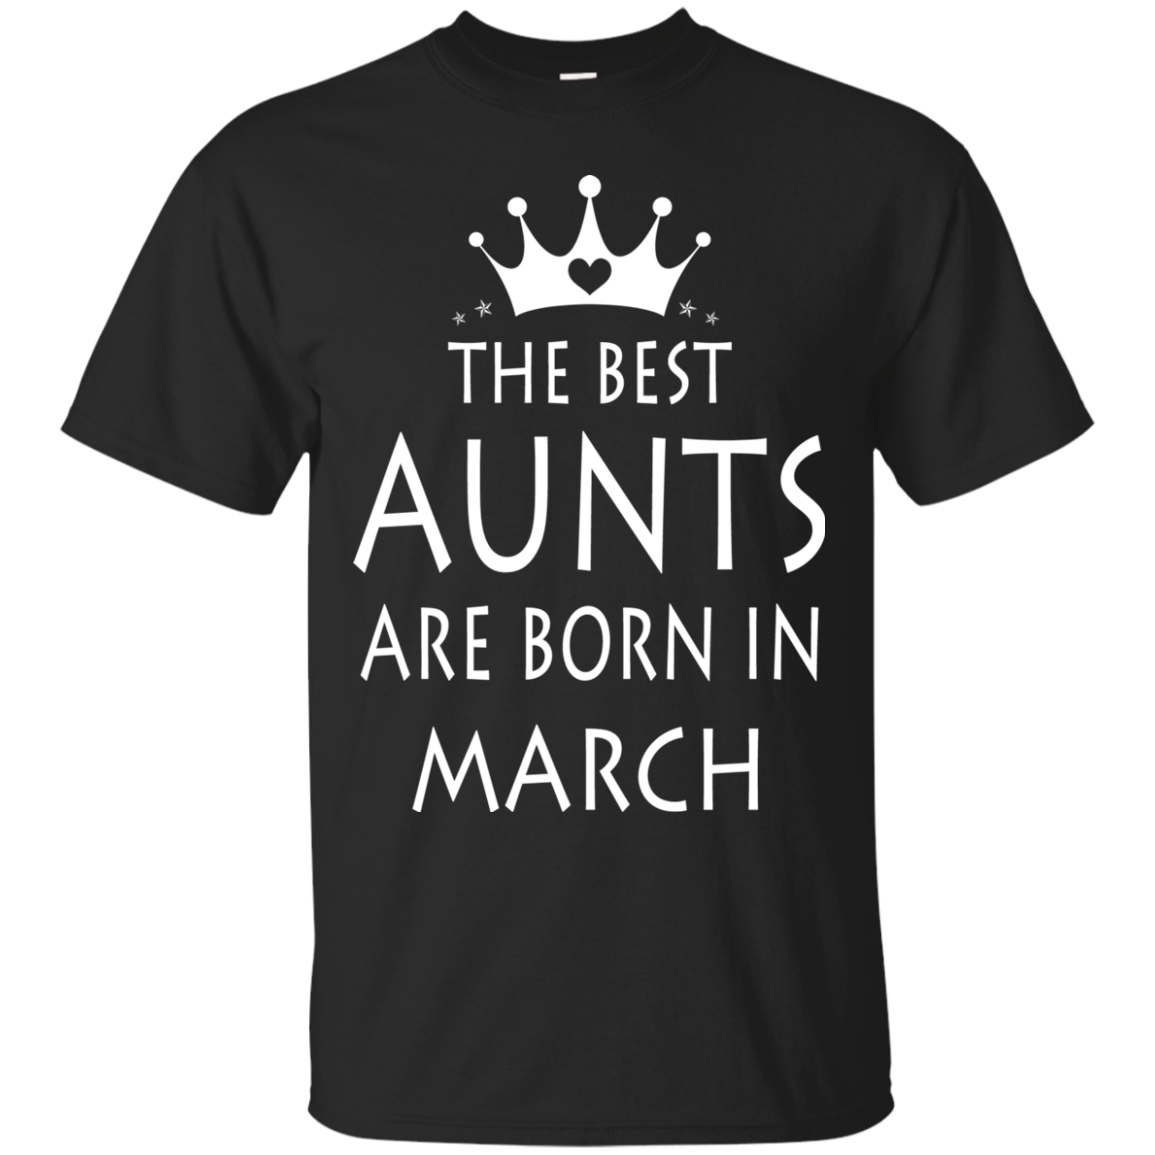 The best Aunts are born in March shirt, tank, sweater